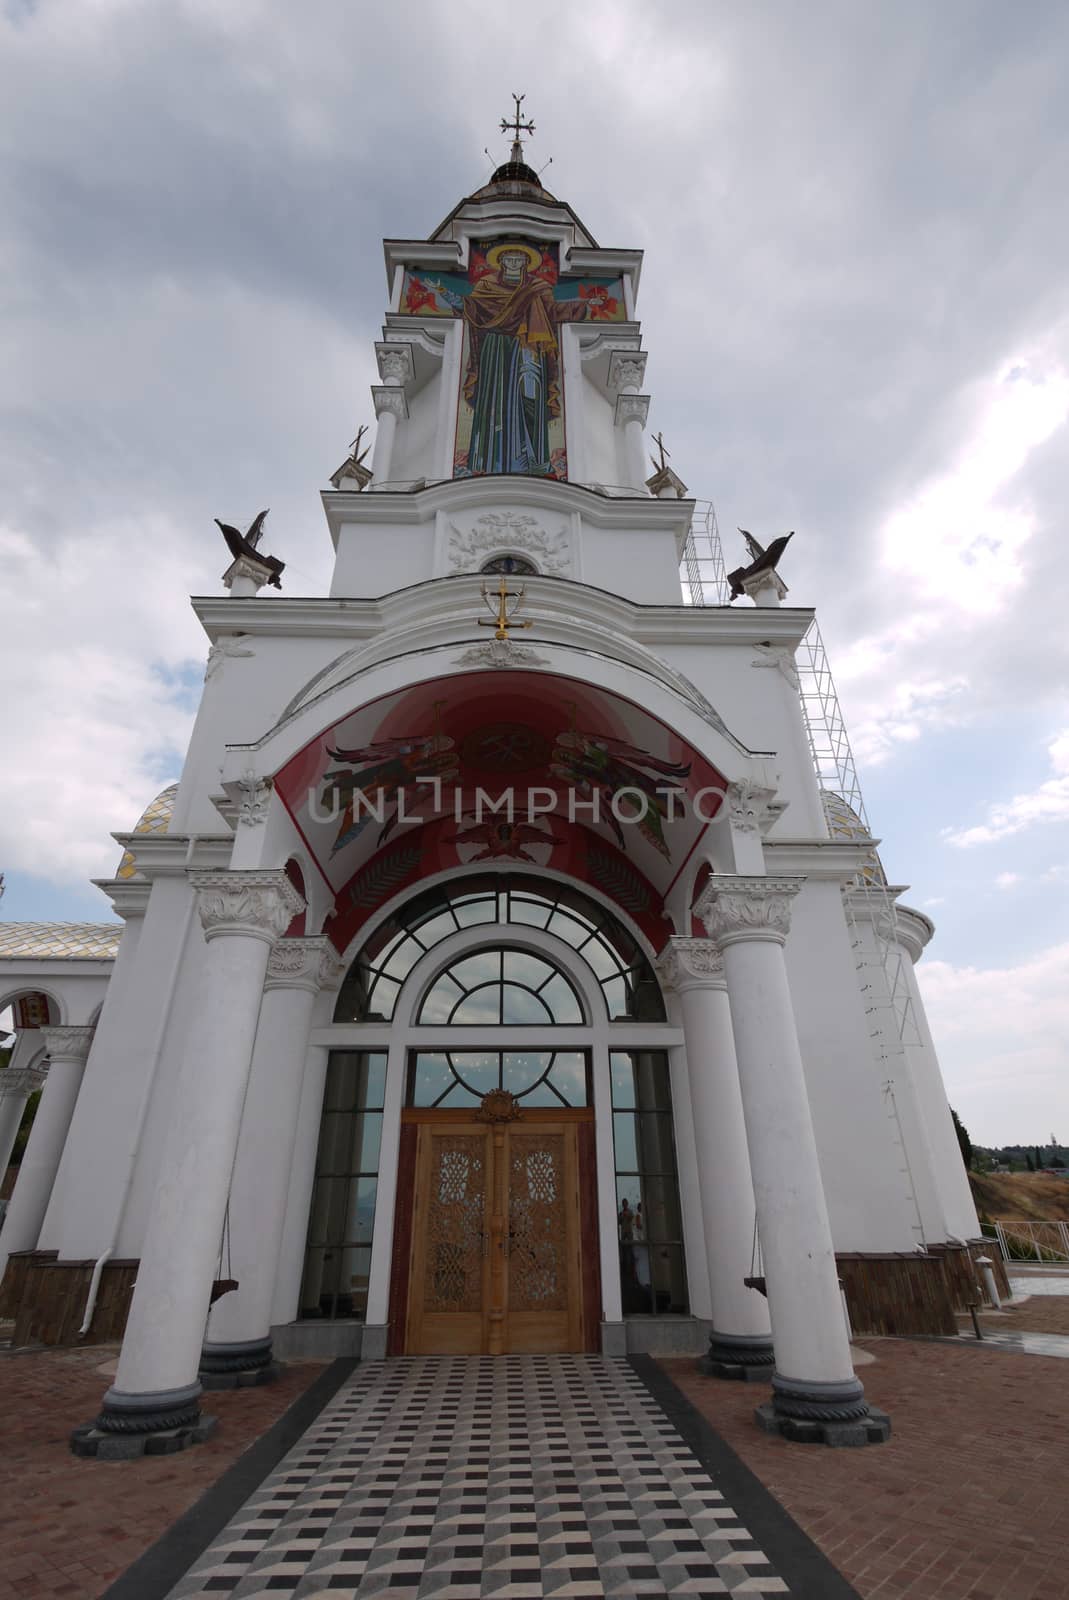 Beautiful central entrance to the church church with white columns and religious paintings